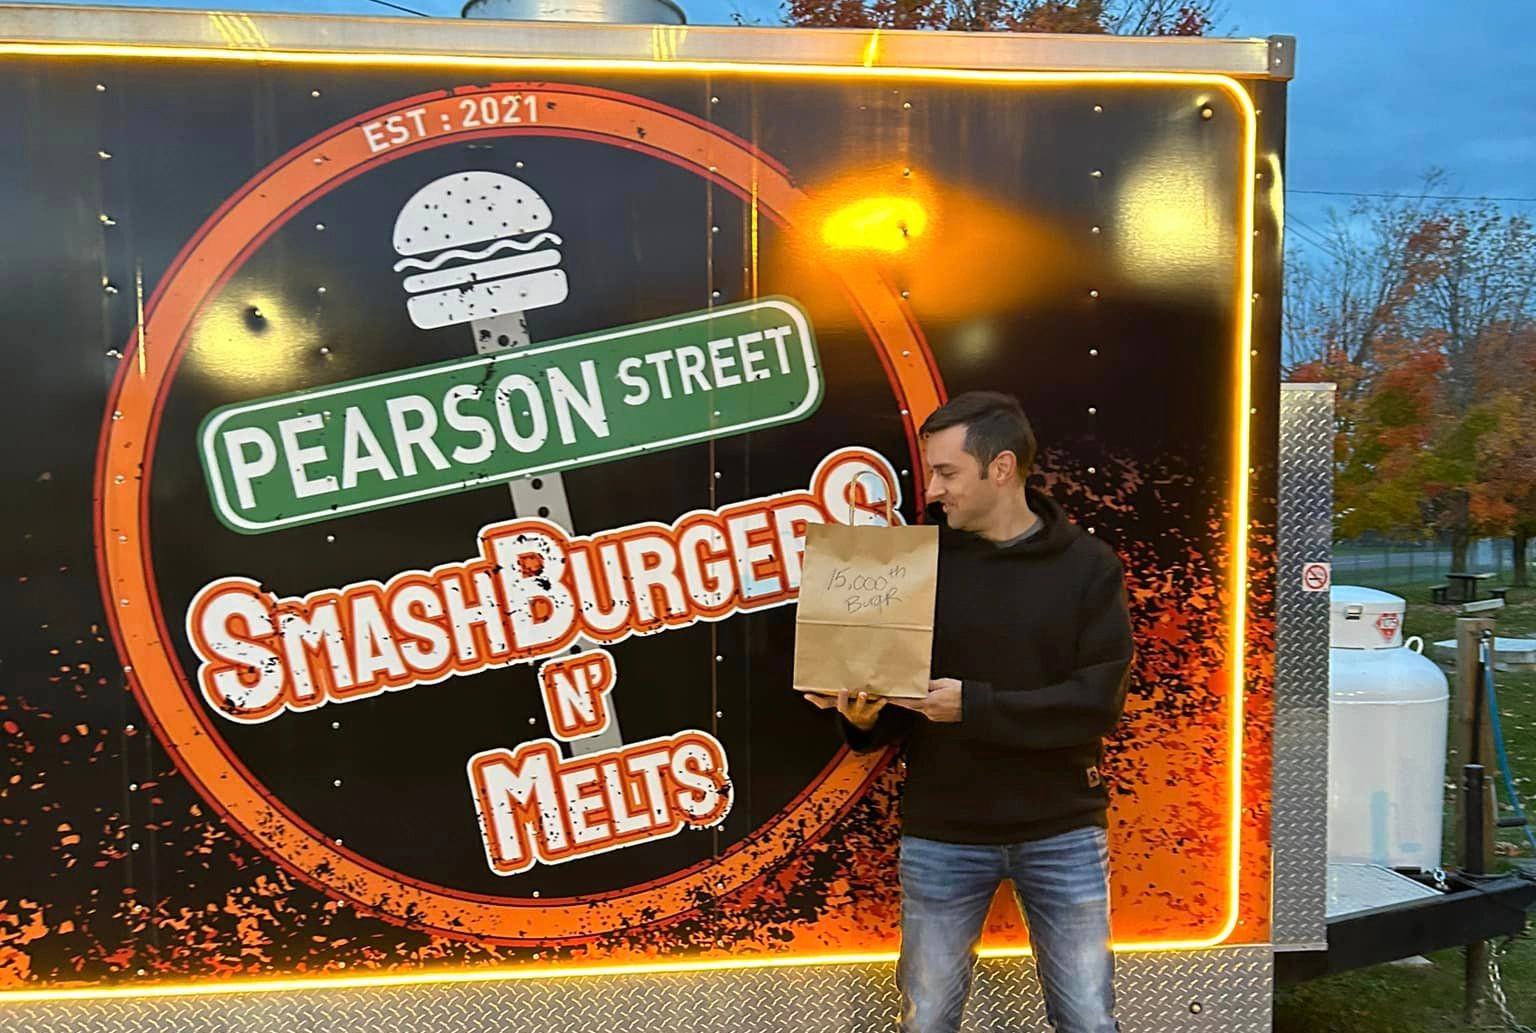 Man holding a paper bag stands in front of a "pearson street smashburger n melts" mobile kitchen during twilight, Contact